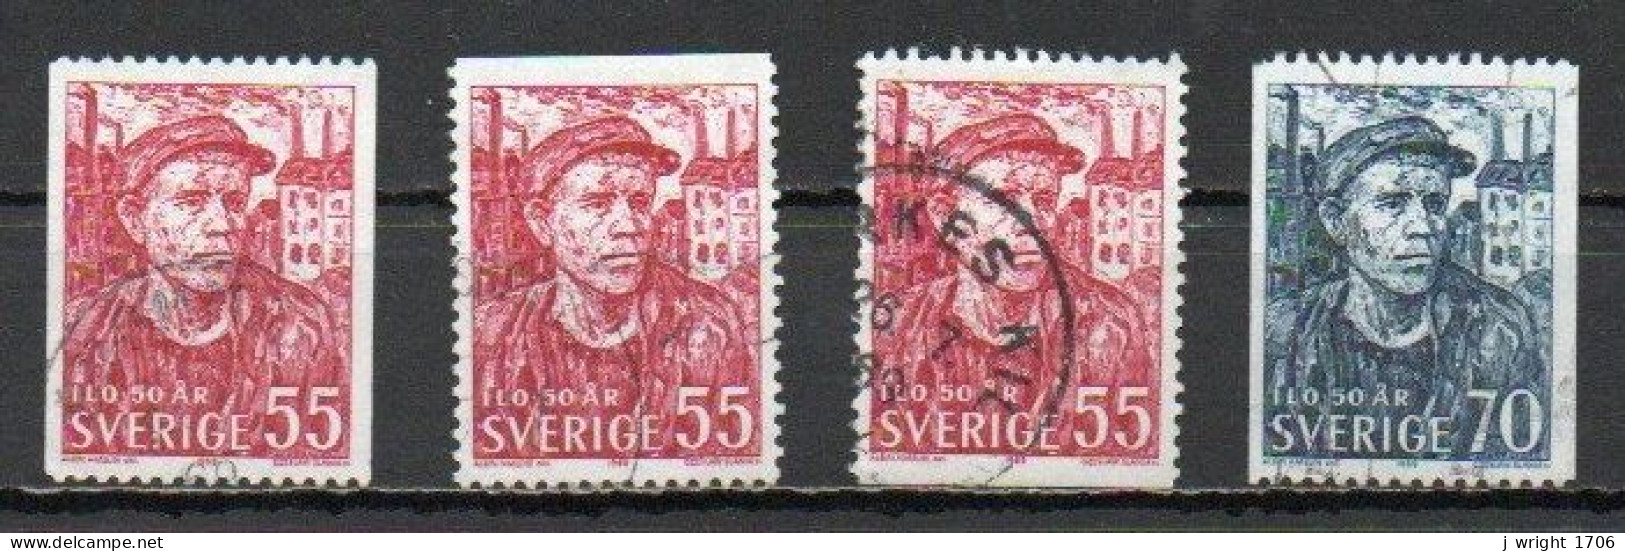 Sweden, 1969, ILO 50th Anniv, Set, USED - Used Stamps